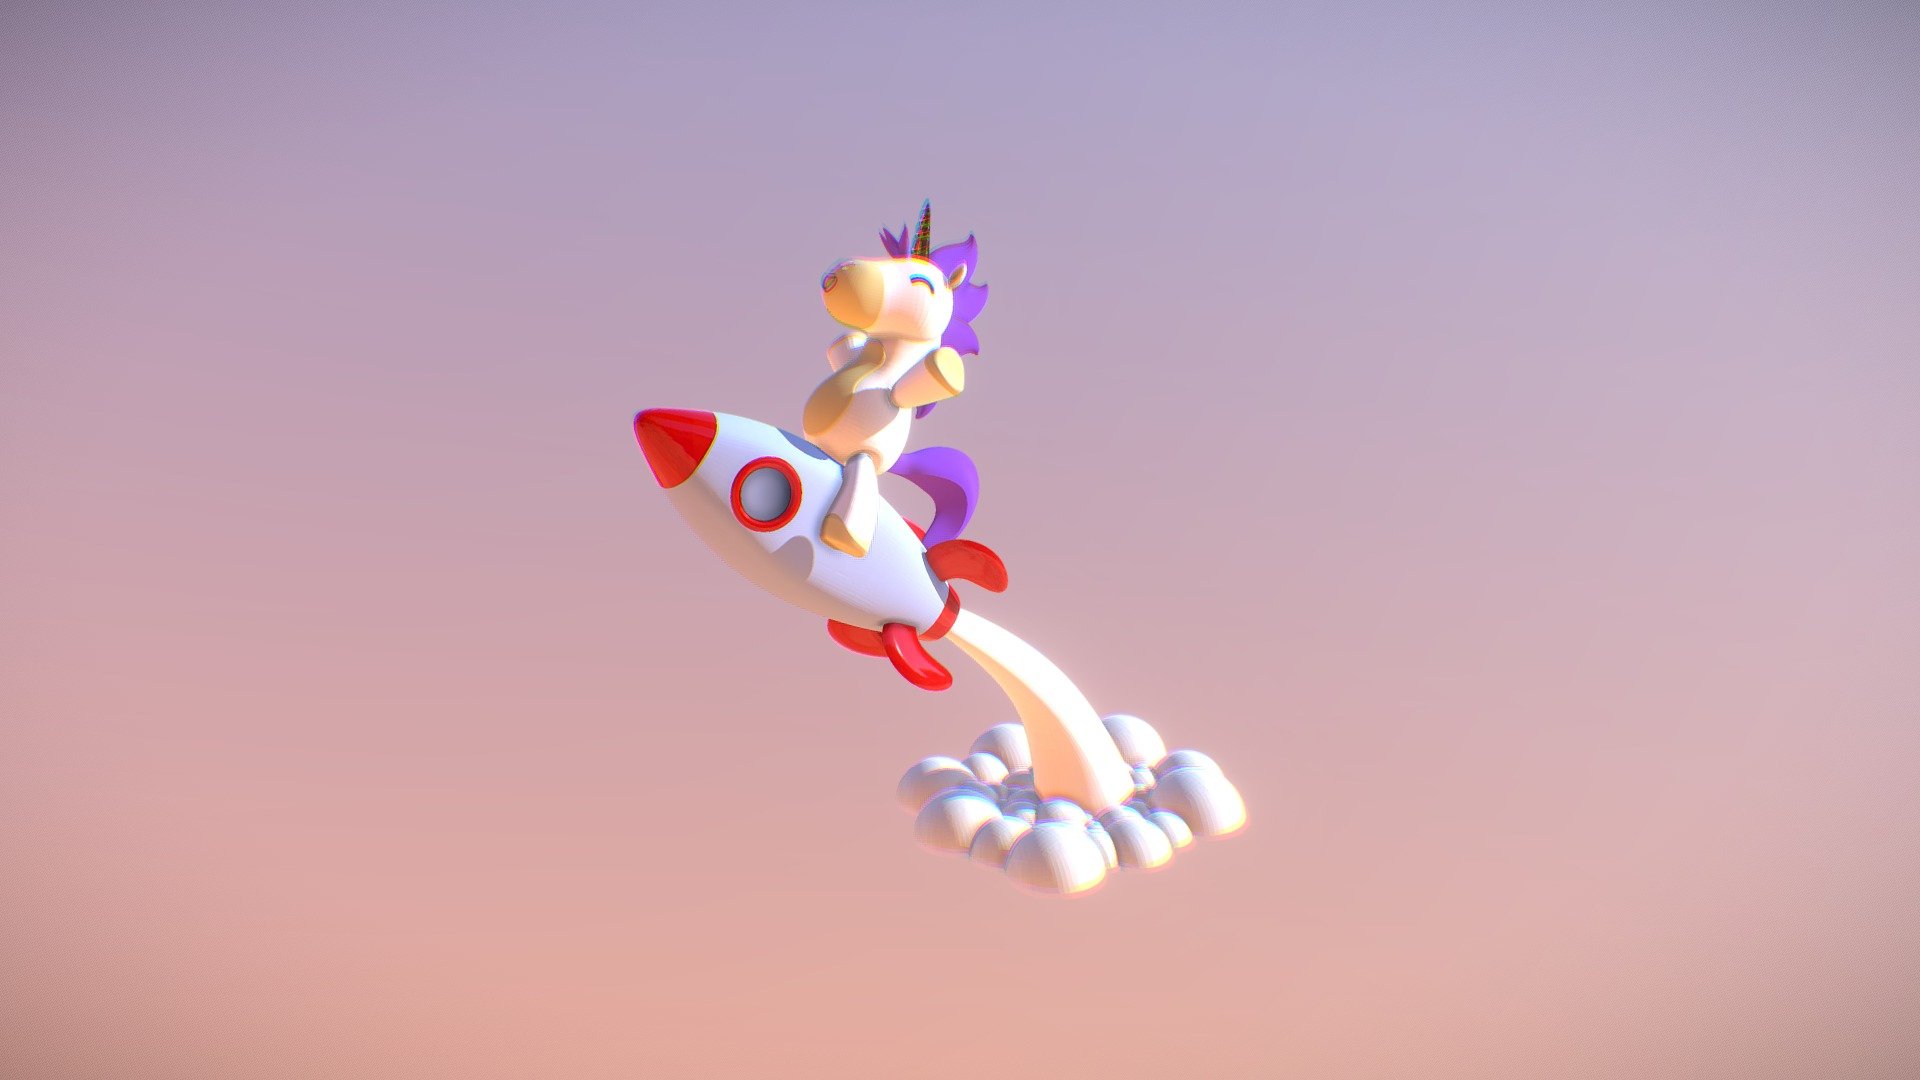 Official New Toylisto Mascot. Why a Unicorn on Rocket? Because we were all artist and full creative when we was child. Whats happen after when we grow? Don't stop believe in unicorns and space rockets! Remember who you are, be creative again. Be you - Unicorn Rocket Toylisto - 3D model by JuguetesToylisto 3d model